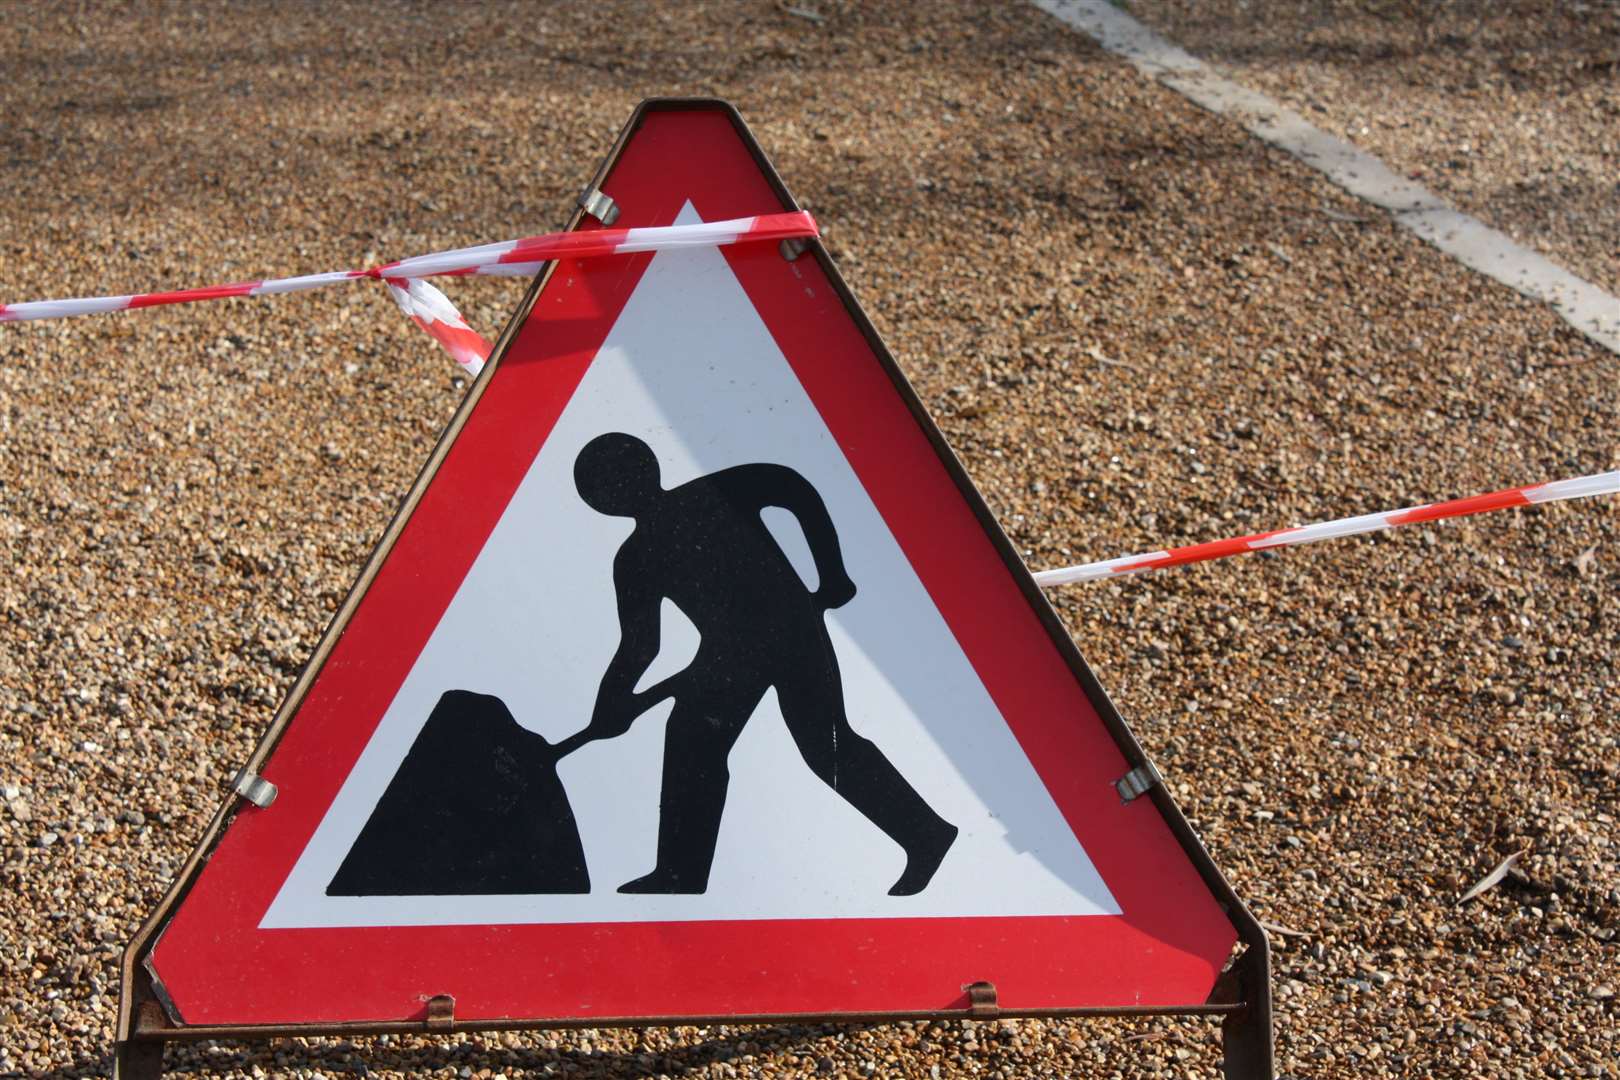 The roadworks have sat completely idle for more than three weeks, leaving drivers baffled.